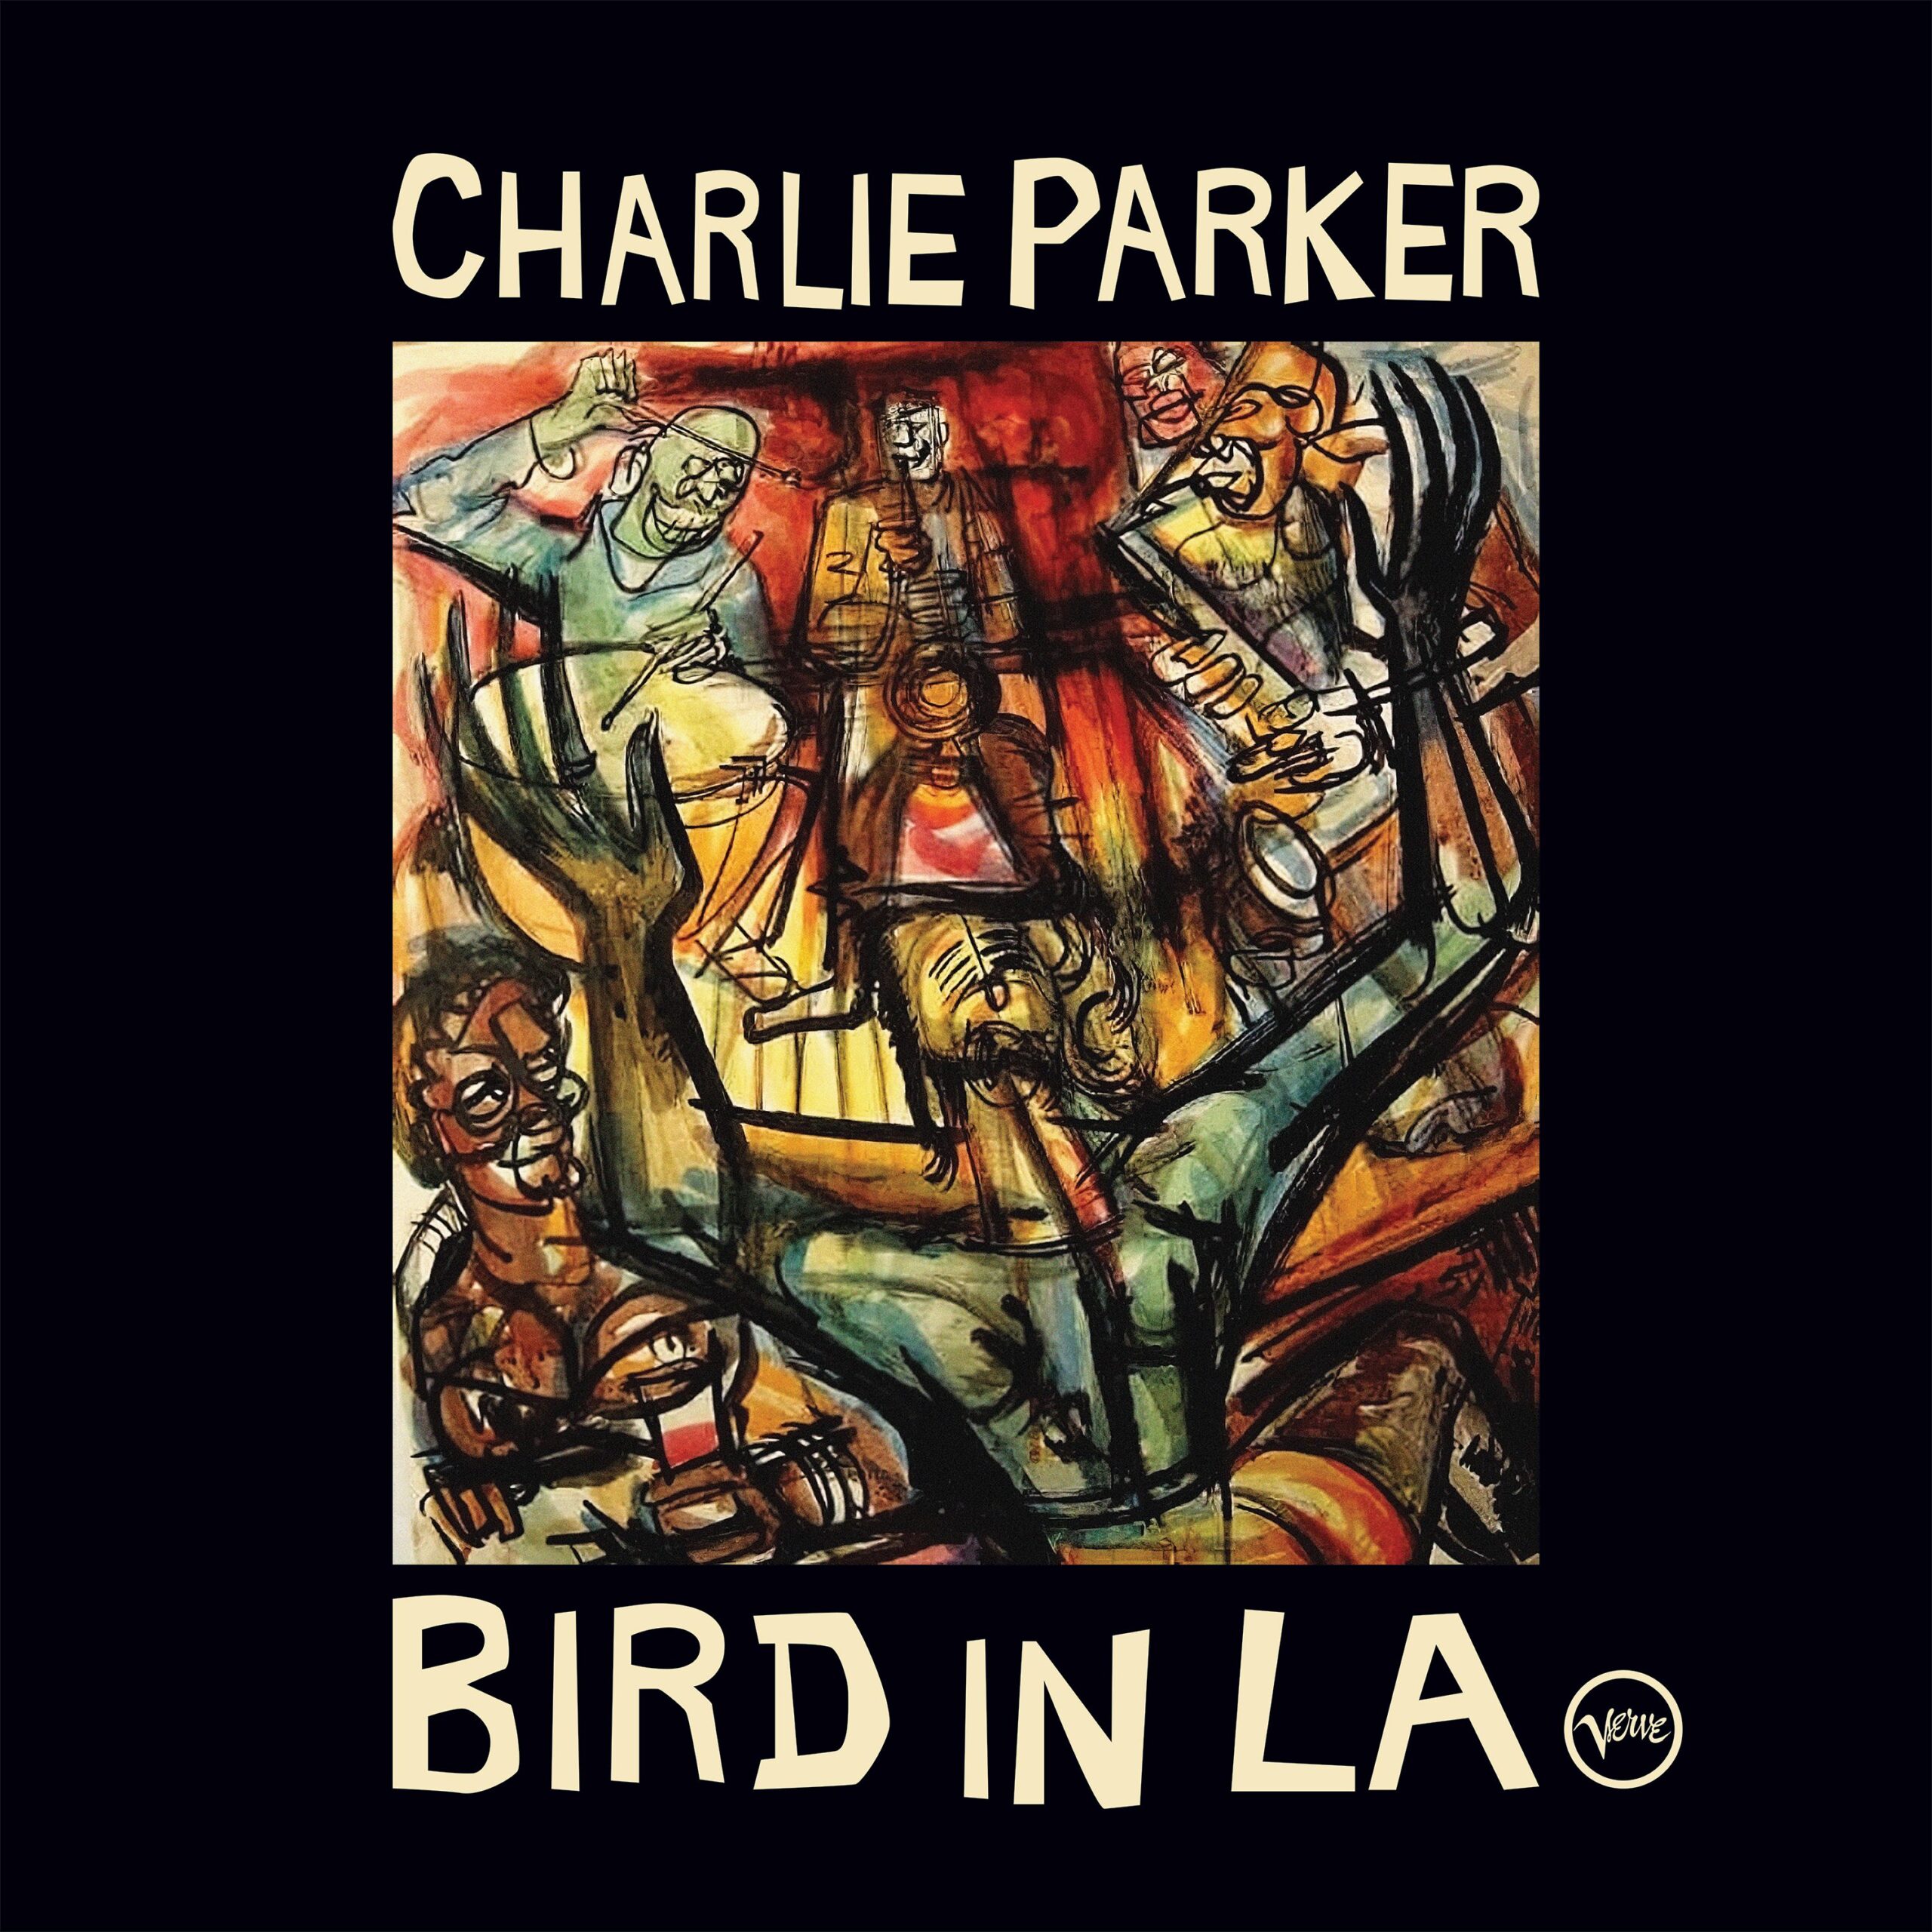 BIRD IN LA . . . Available Exclusively In Record Stores Starting July 17th As Part of Record Store Day’s Drops